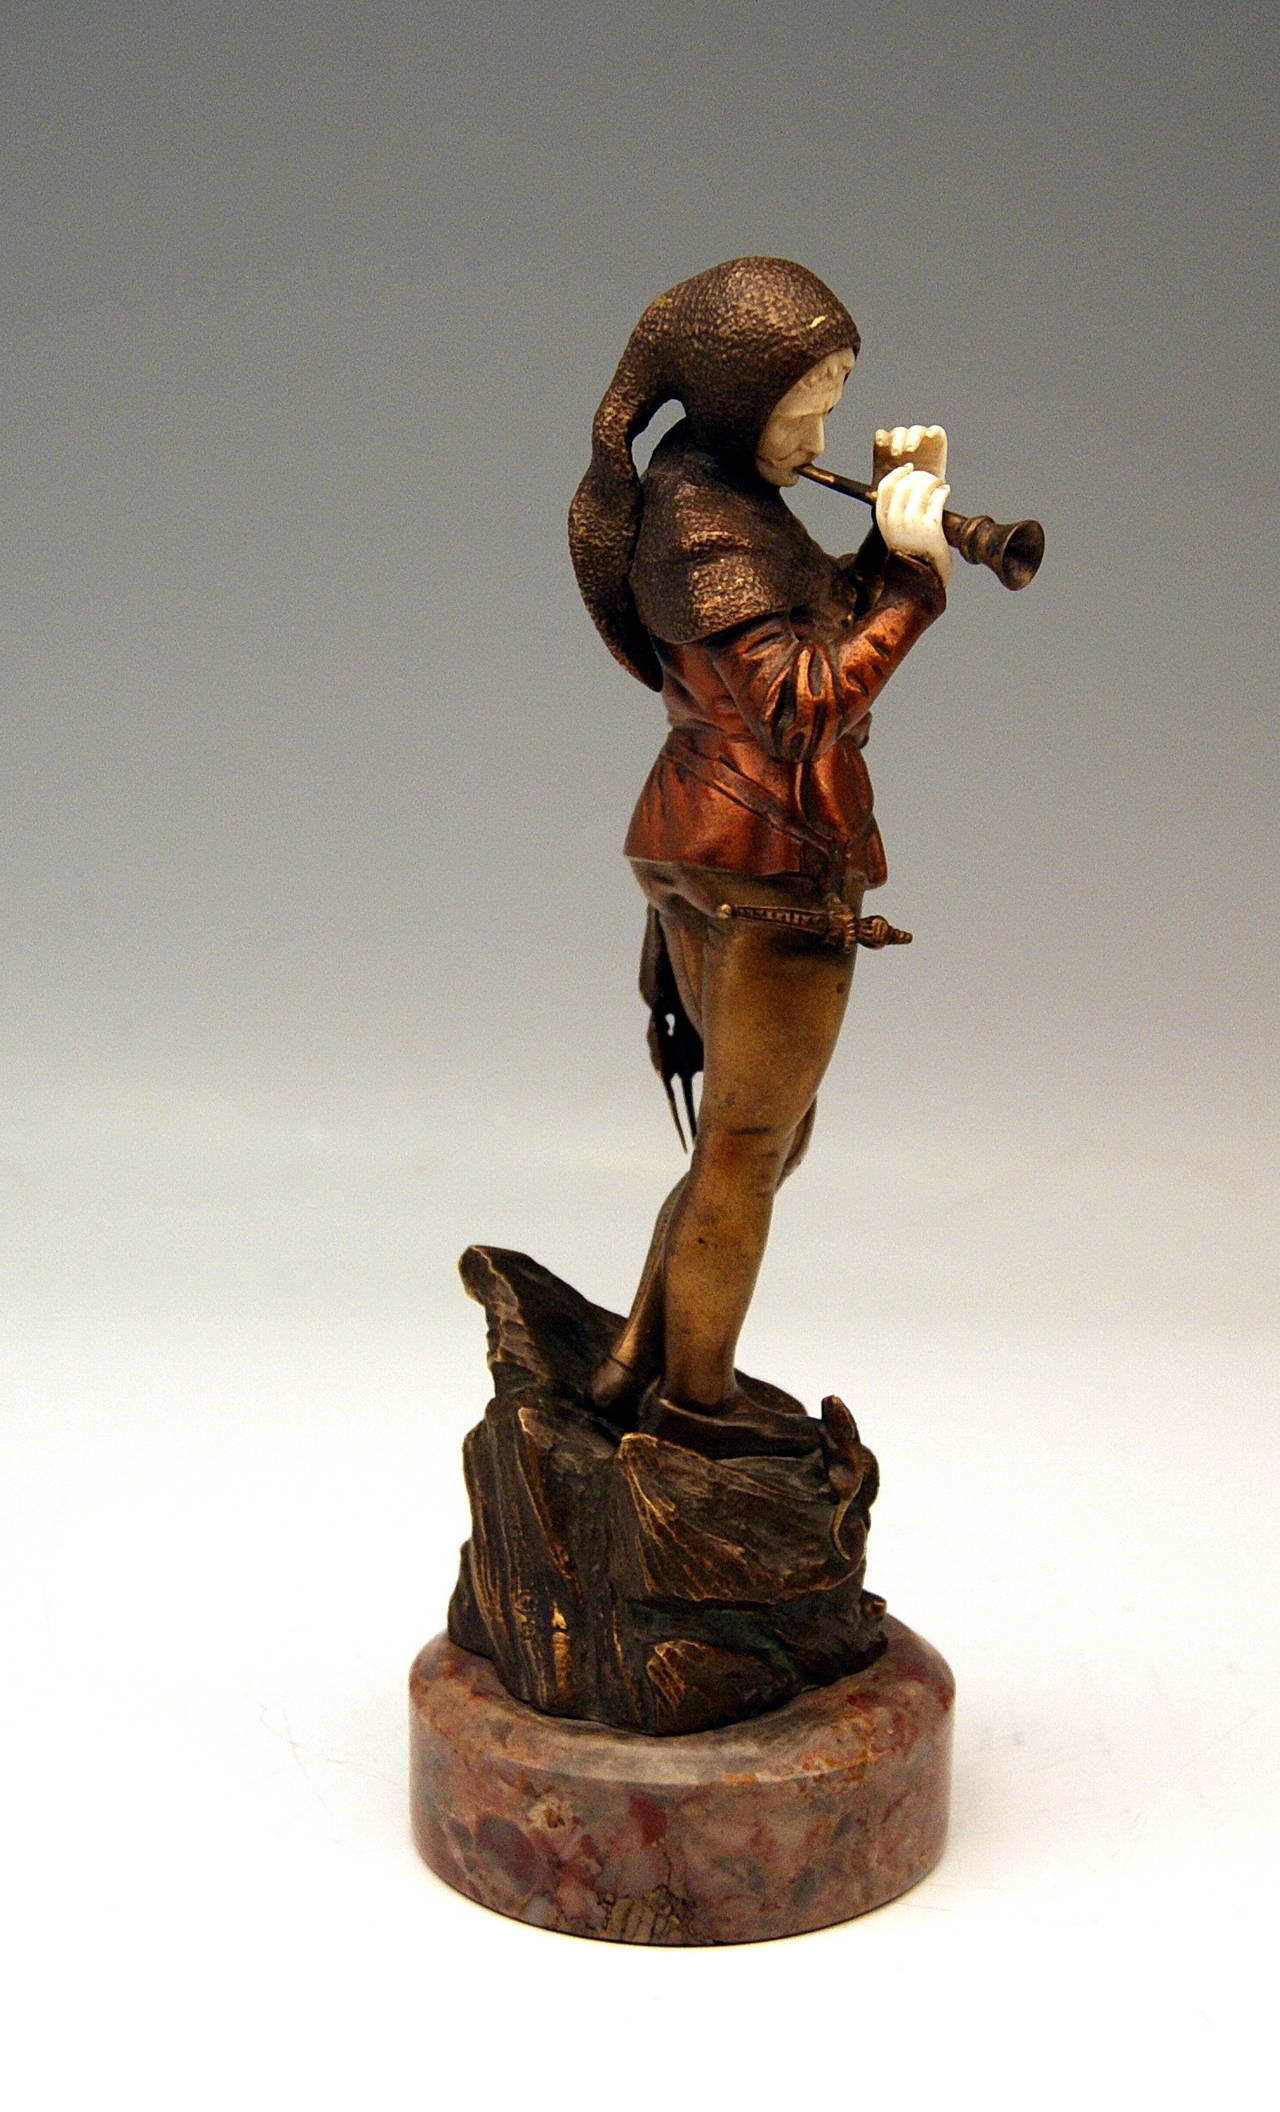 There is a  GORGEOUS BRONZE FIGURINE presented: 
It is The Pied Piper of Hamelin* playing the pipe.  
The figurine's impression is very fine - it is looking like very lifelike !  The man's figurine is clad in medieval garments  (hood, shirt,